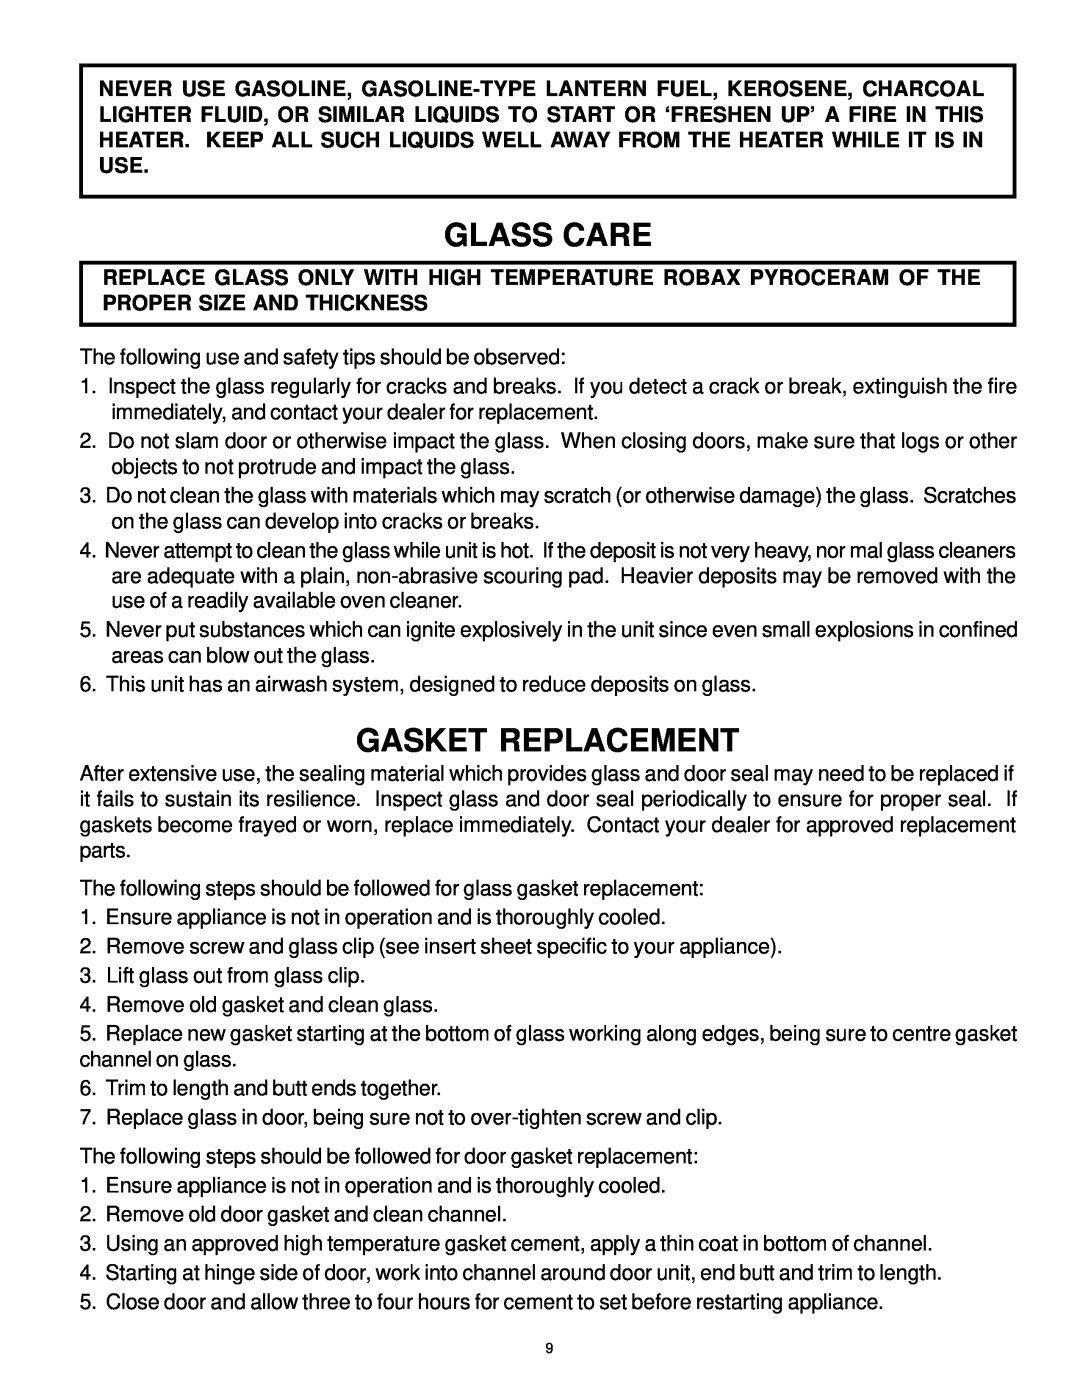 Vermont Casting WOOD STOVE owner manual Glass Care, Gasket Replacement 